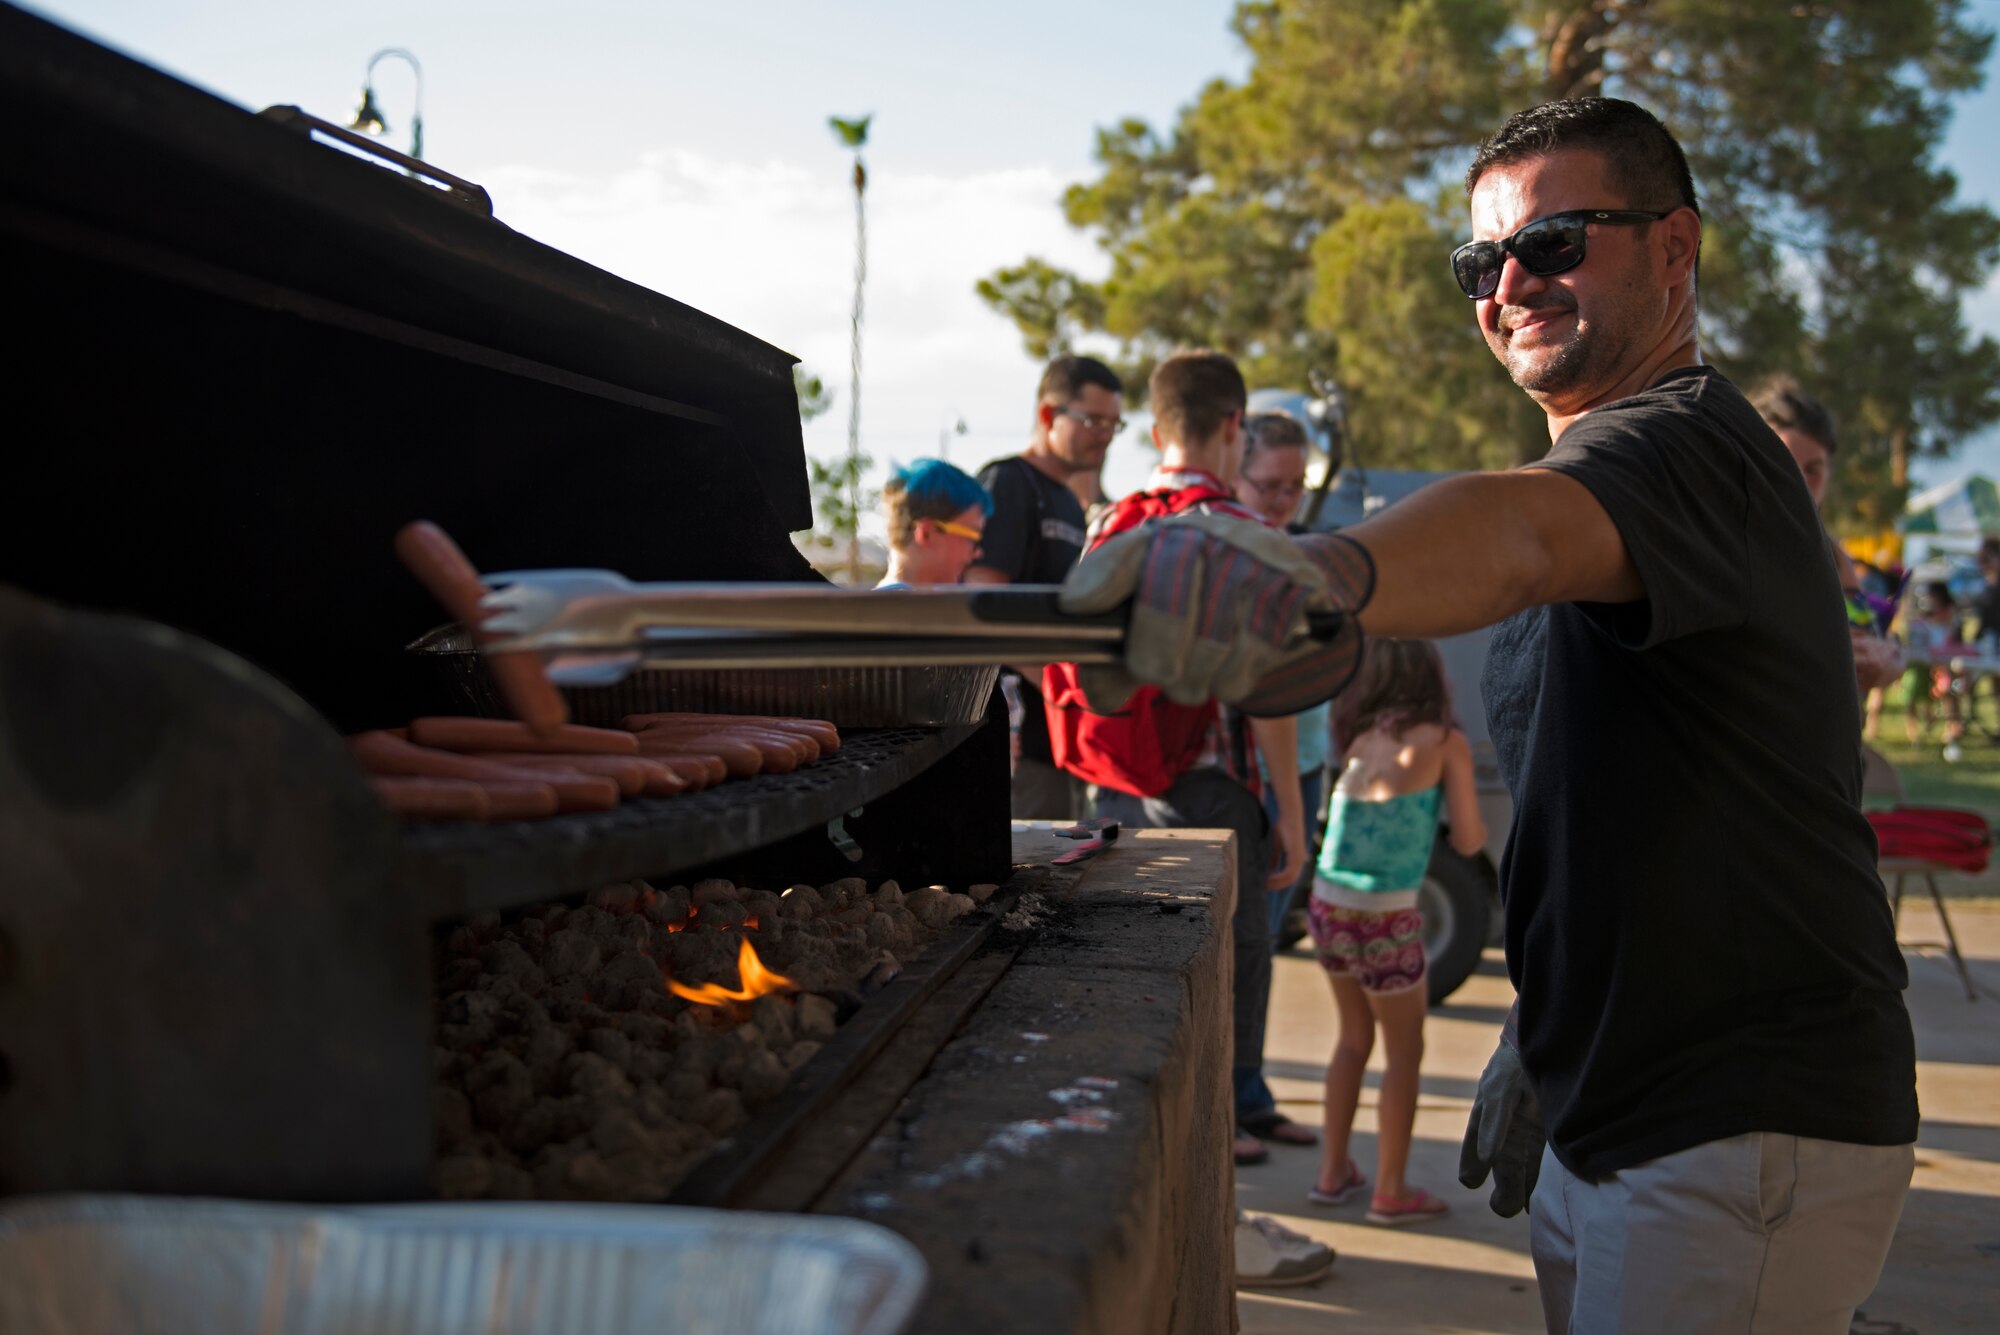 A volunteer cooks hotdogs for the Back-To-School Bash July 25, 2018, at Luke Air Force Base, Ariz. In addition to providing free school supplies to kids, the Bash offered families and attendees free food, games, and prize drawings. (U.S. Air Force photo by Senior Airman Ridge Shan)